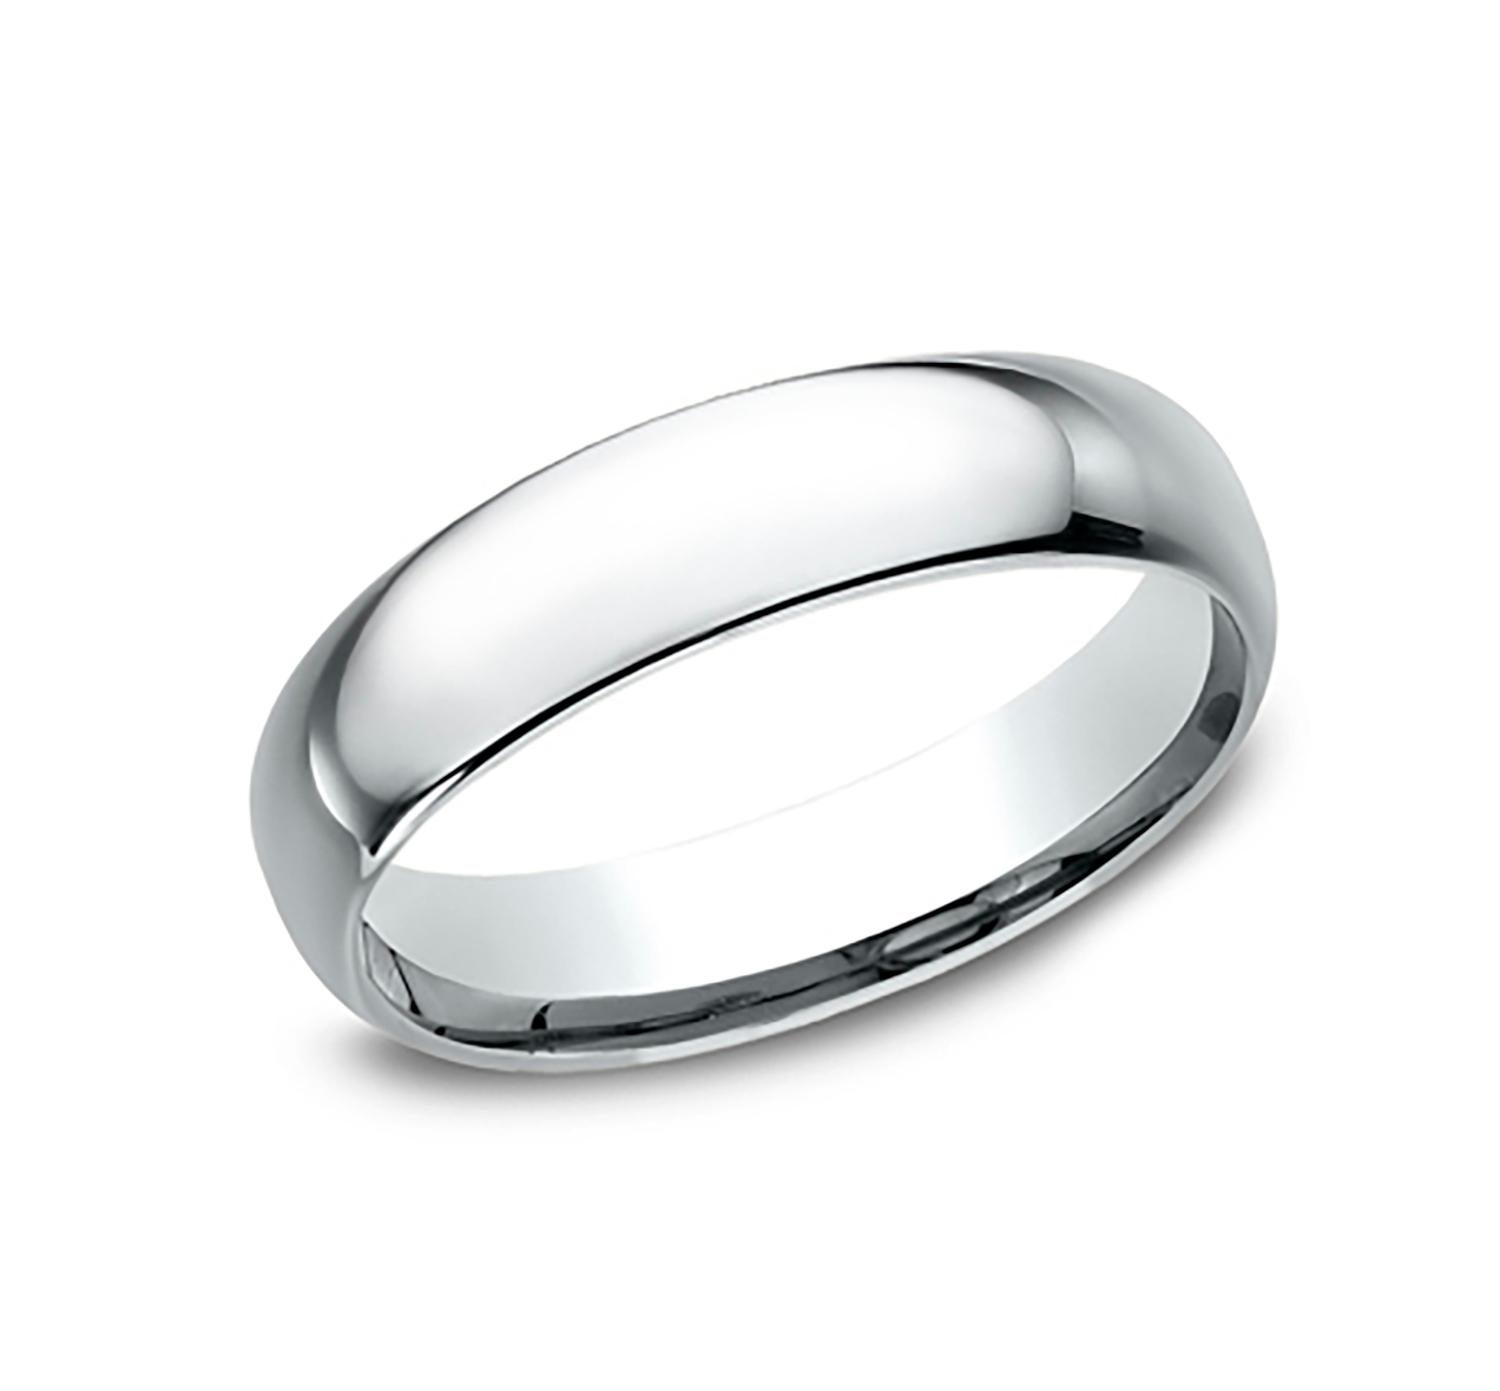 Benchmark wedding band in polished platinum finish. Width 5mm, high dome comfort fit. Custom engraving and finishing available. Size 9 US and resizable upon request. Available in 1/4, 1/2, and 3/4 sizes, for more information please message us on